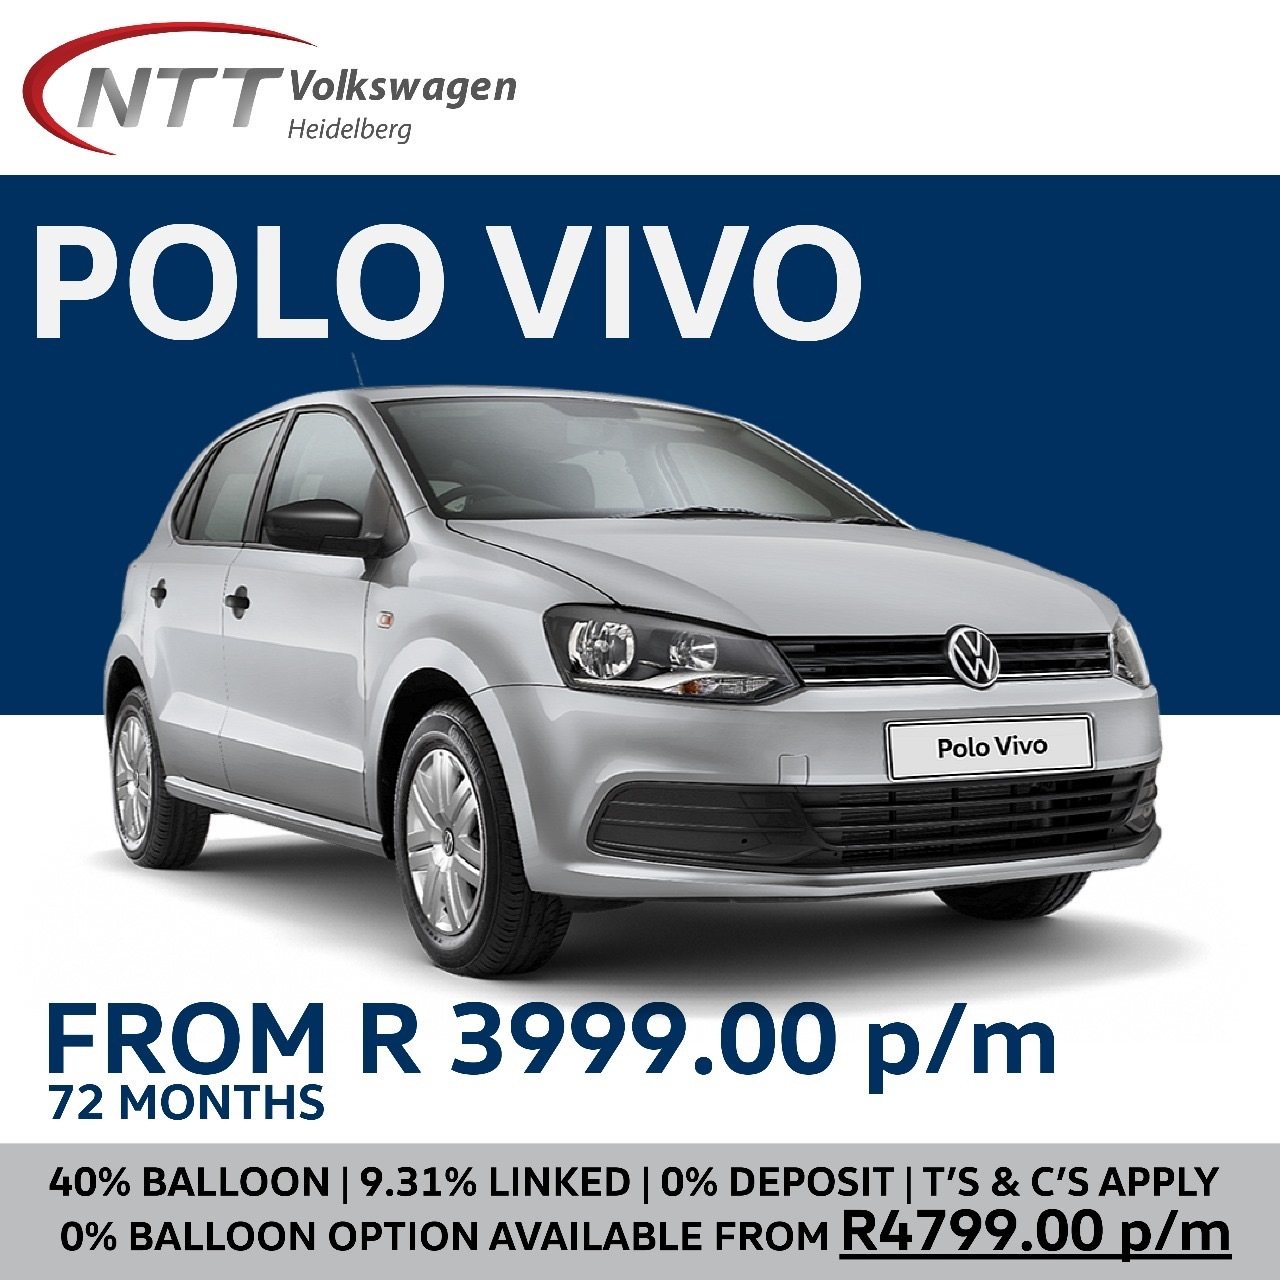 POLO VIVO - NTT Volkswagen - New, Used & Demo Cars for Sale in South Africa